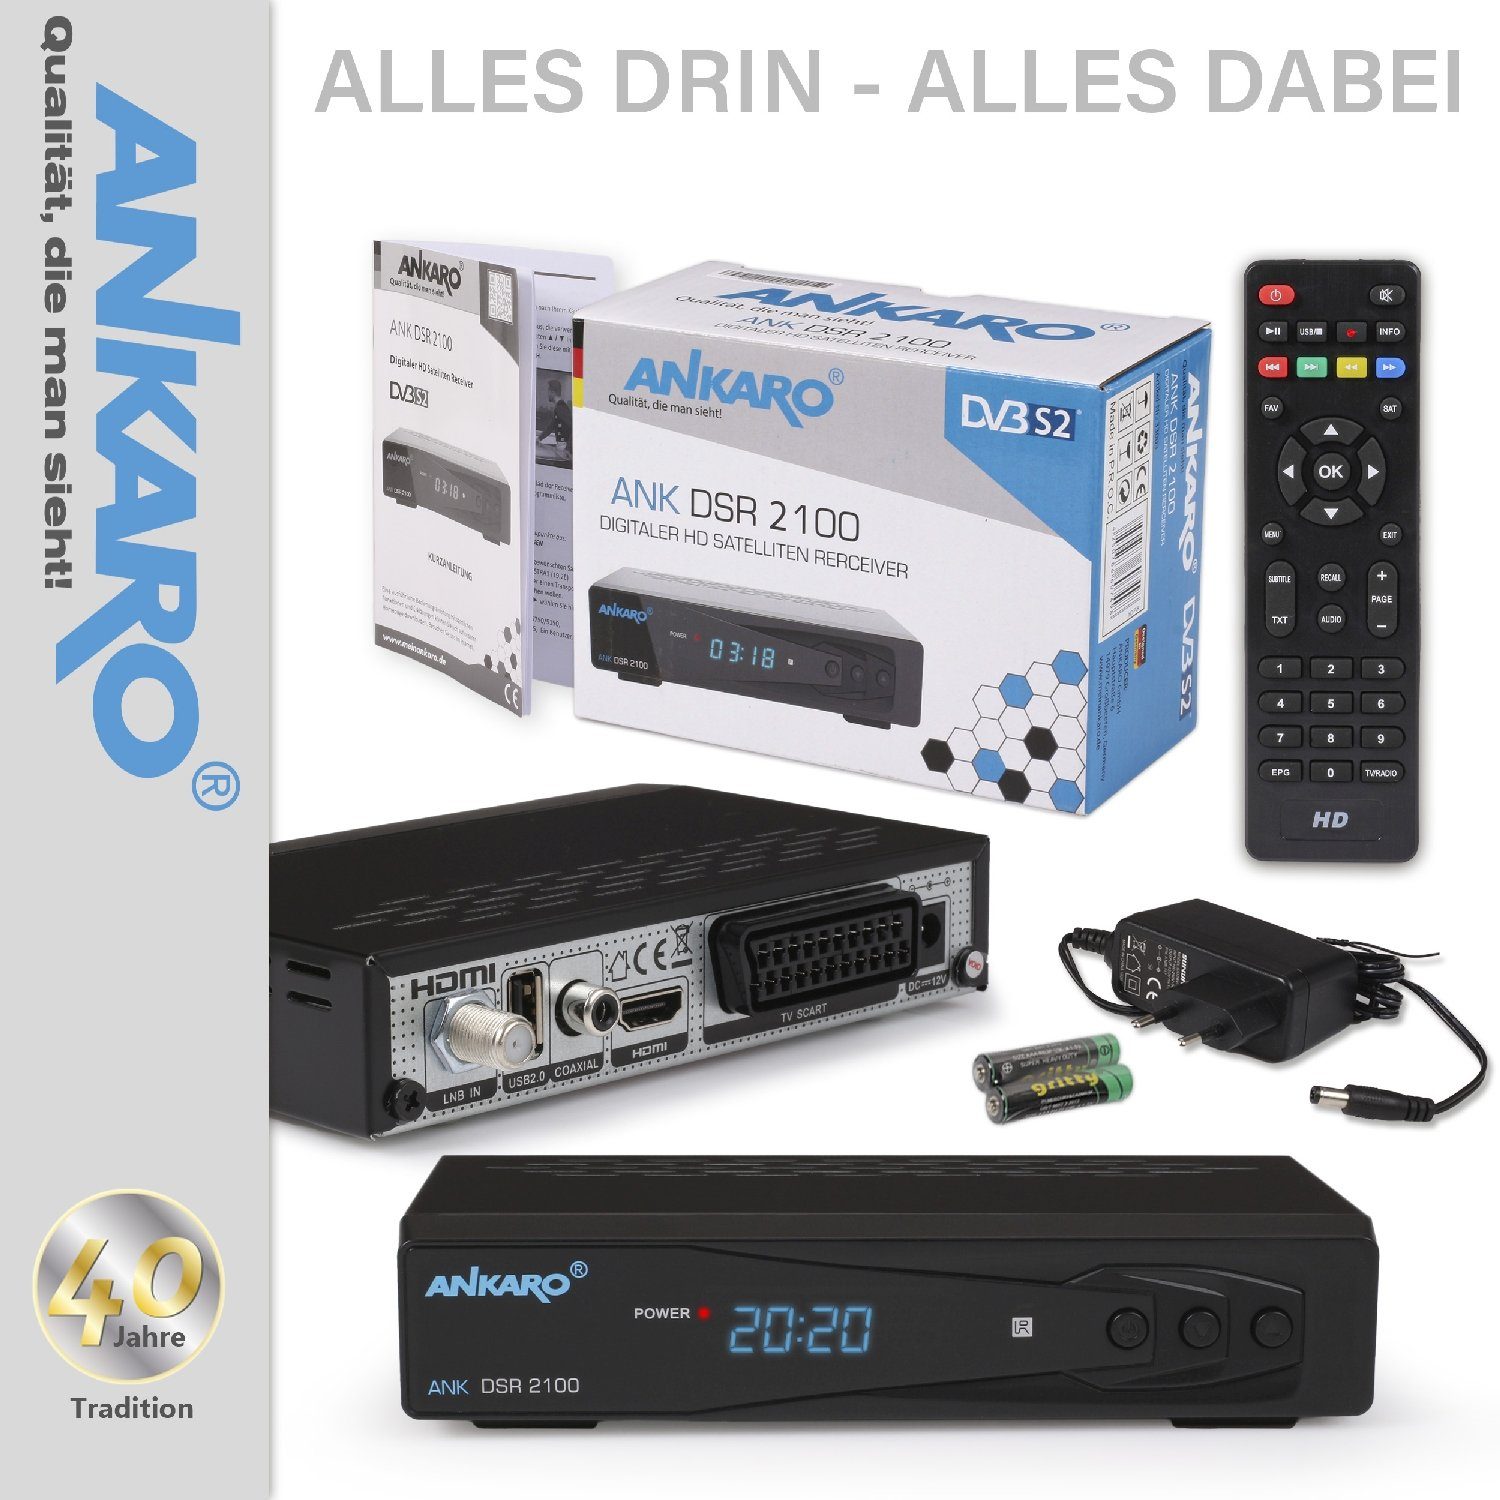 Ankaro 2100 DSR USB, SCART, Aufnahmefunktion - tauglich) & Unicable SAT-Receiver (PVR, Coaxial Kabel mit HDMI Timeshift HDMI, 